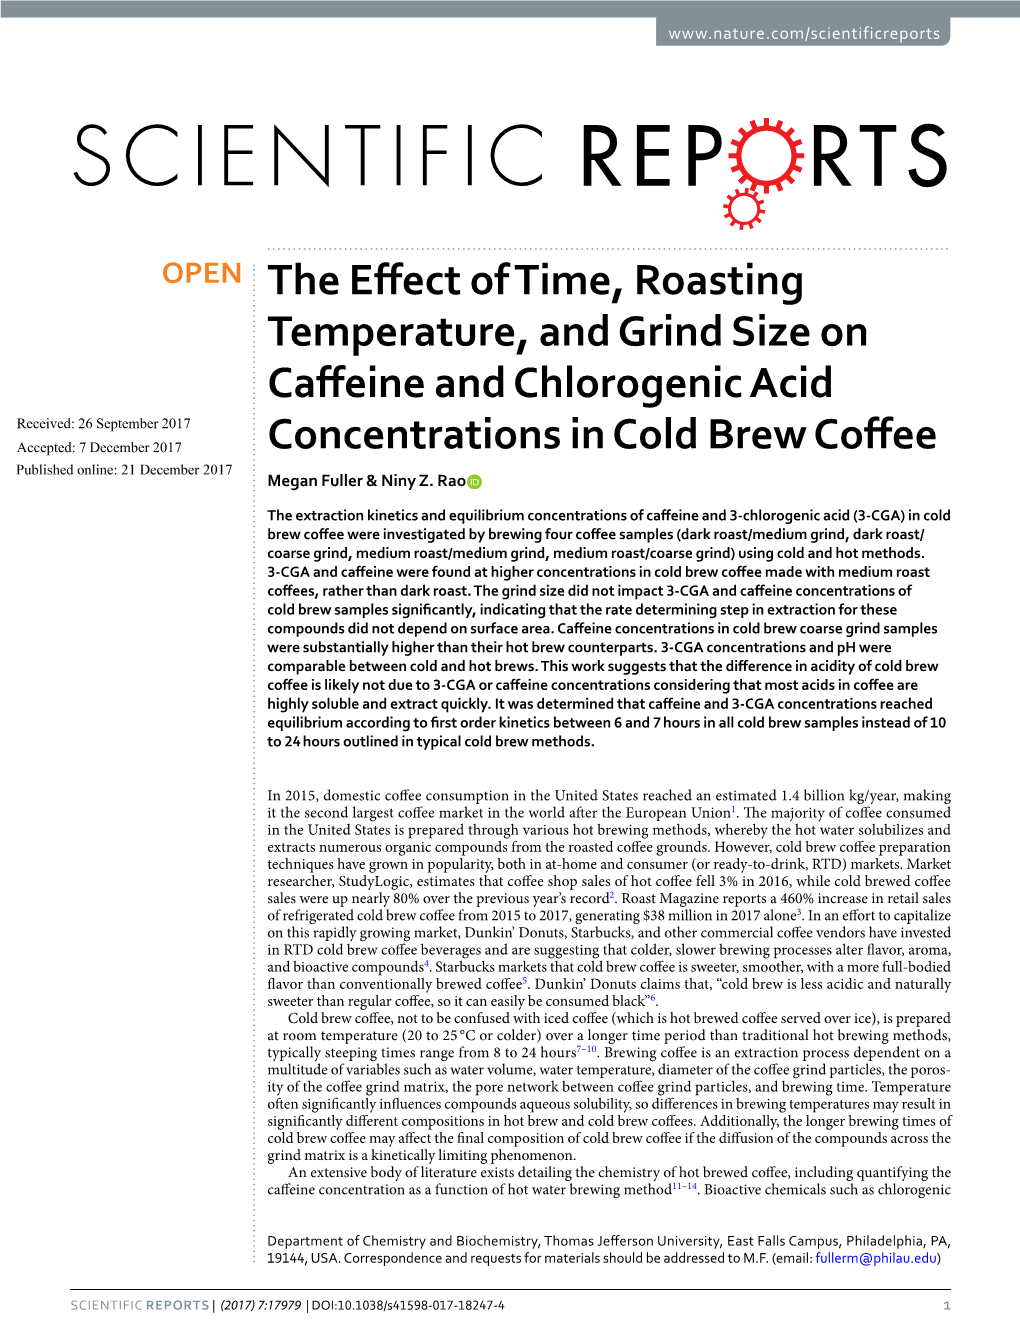 The Effect of Time, Roasting Temperature, and Grind Size On